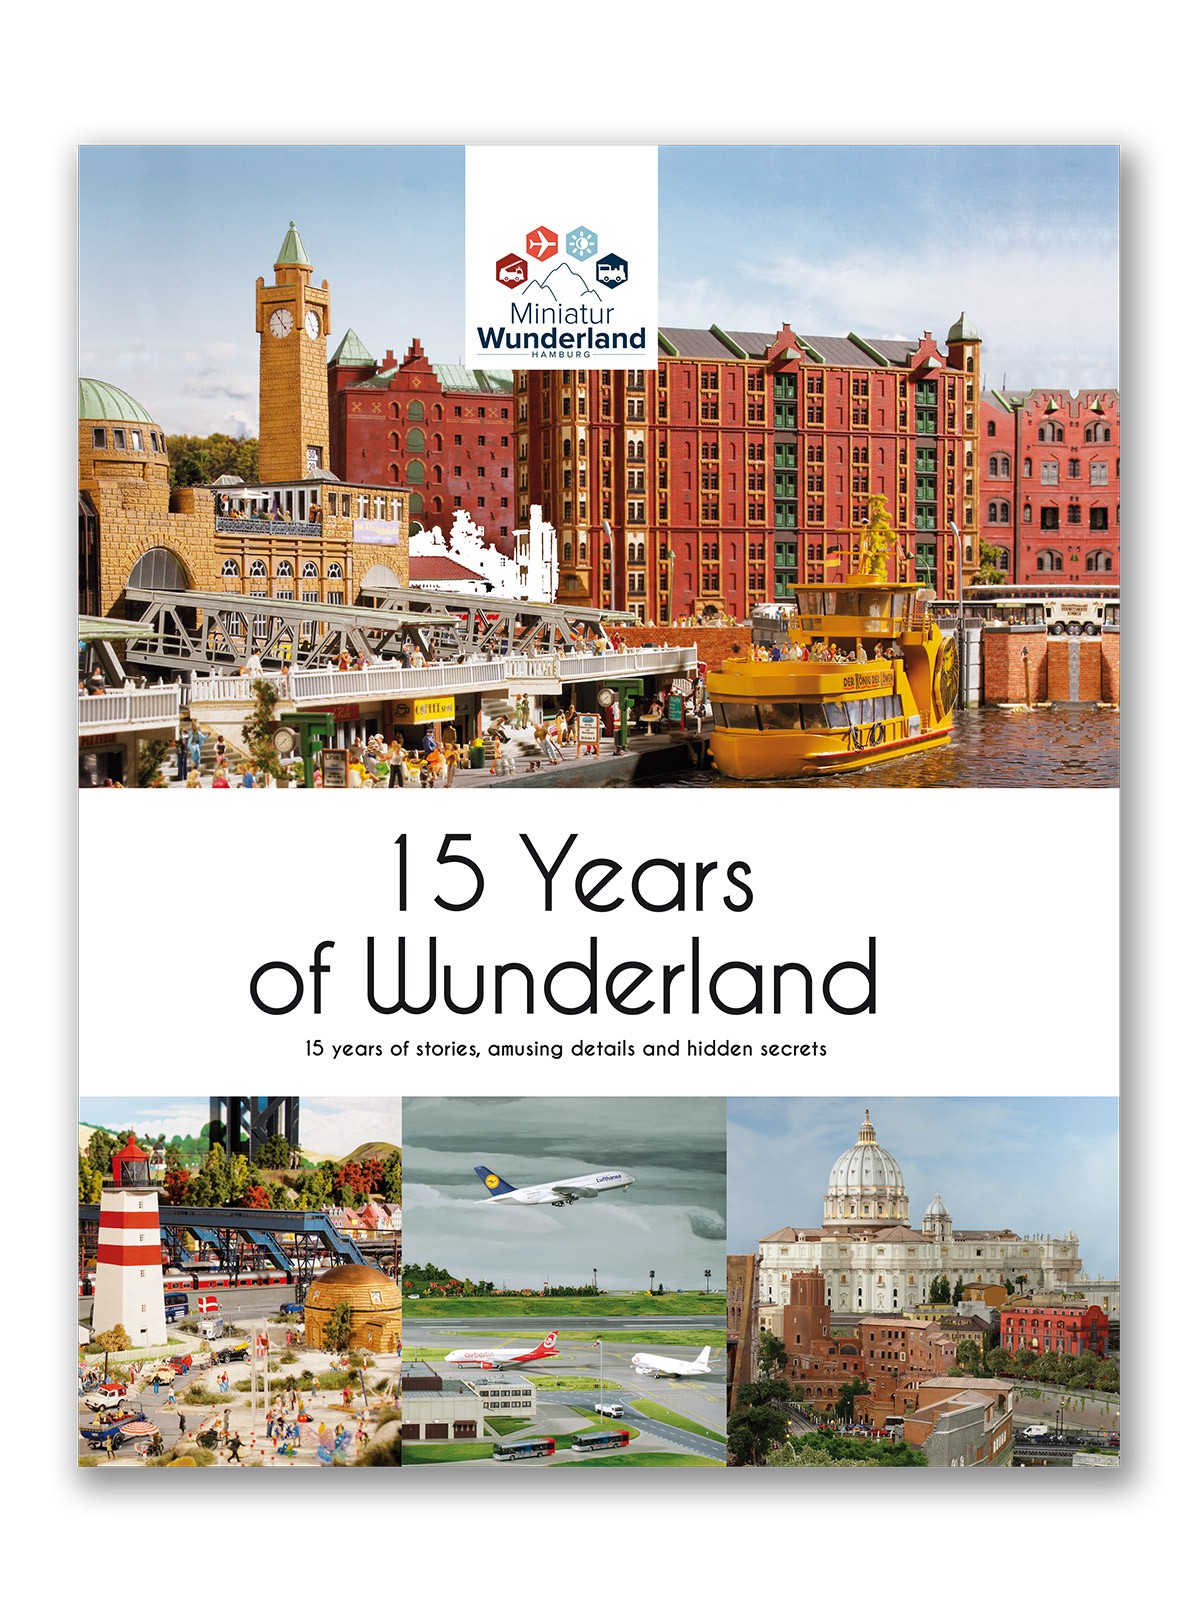 The Miniatur Wunderland Book "15 Years of Wunderland" in english